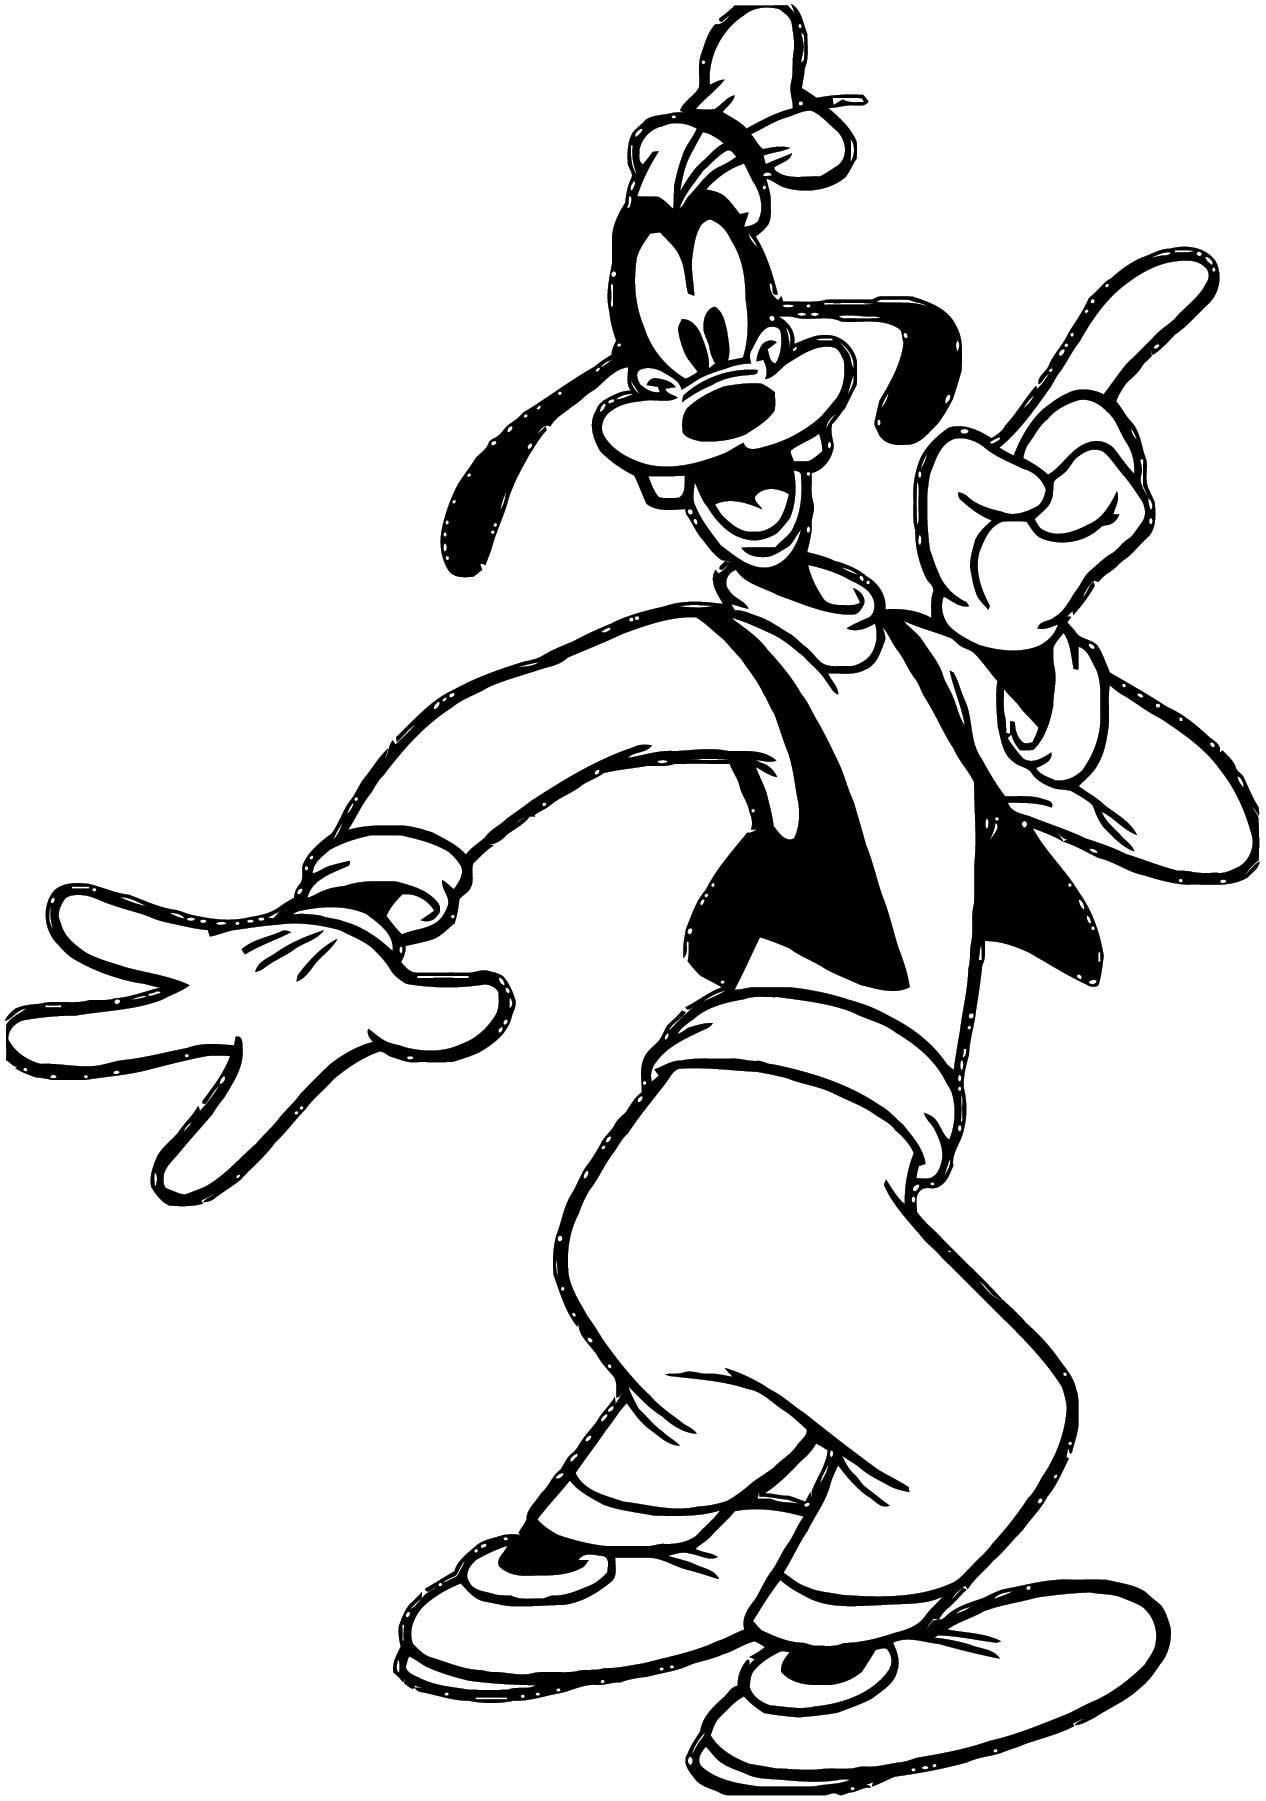 Goofy Coloring Pages 36 - Wecoloringpage.com